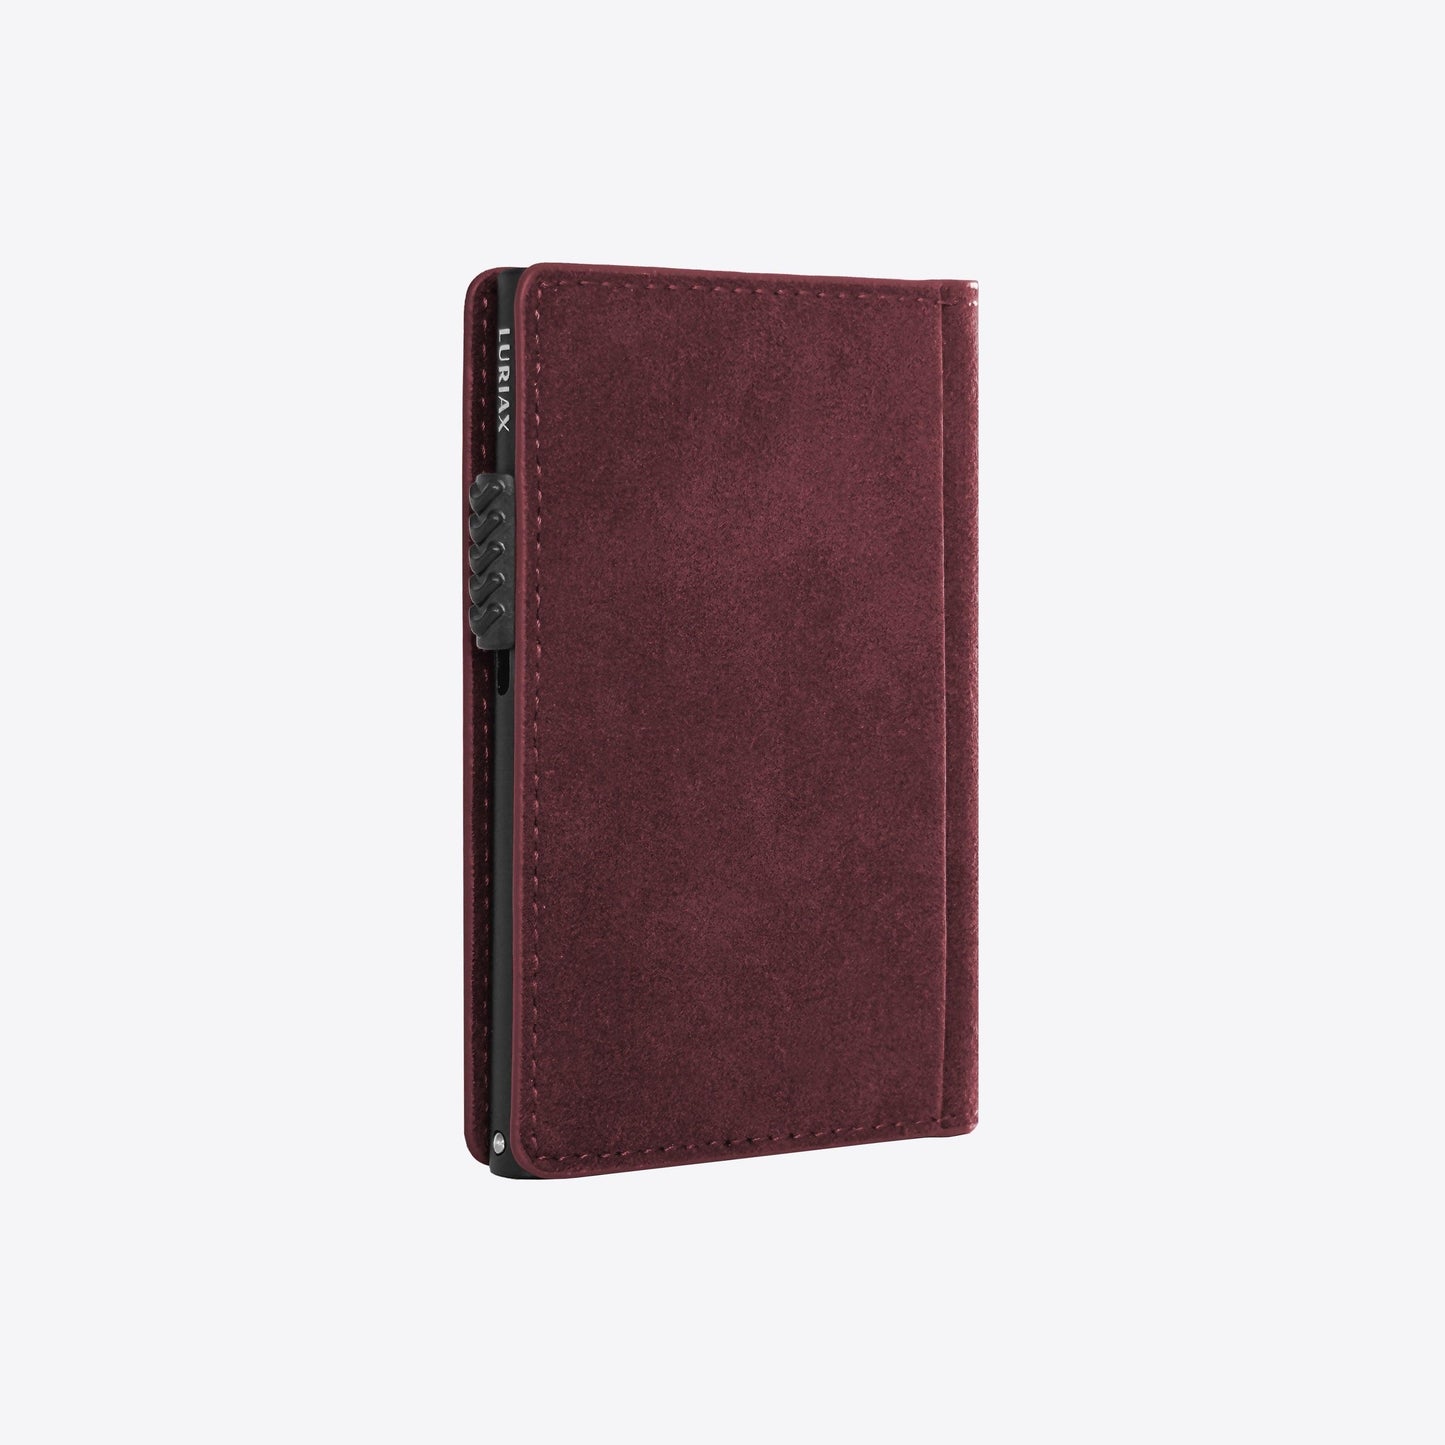 Alcantara Suede Leather iPhone Case and Accessories Collection - The Bifold Cardholder - Bordeaux - Luriax